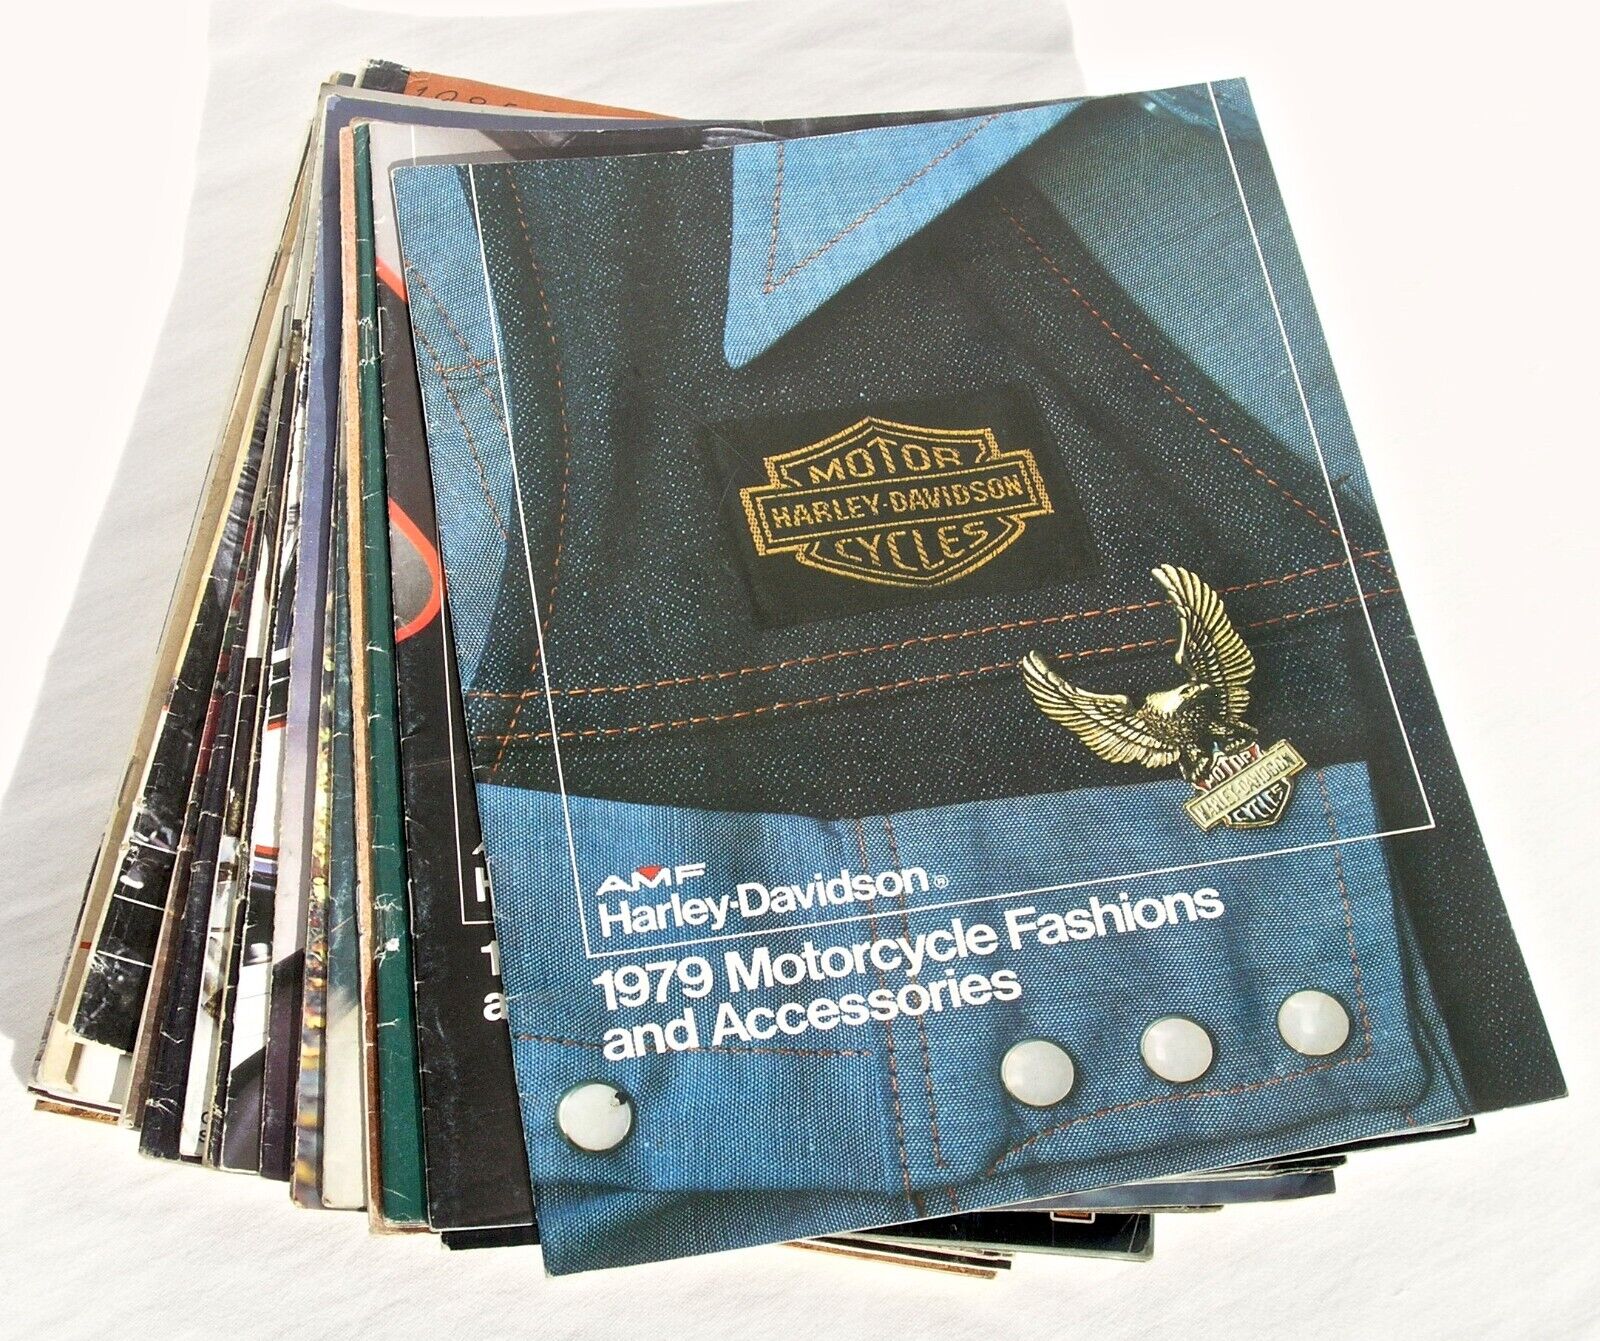 1979-1990 Harley-Davidson Motorcycle Fashion & Accessory Catalogs Lot of 23